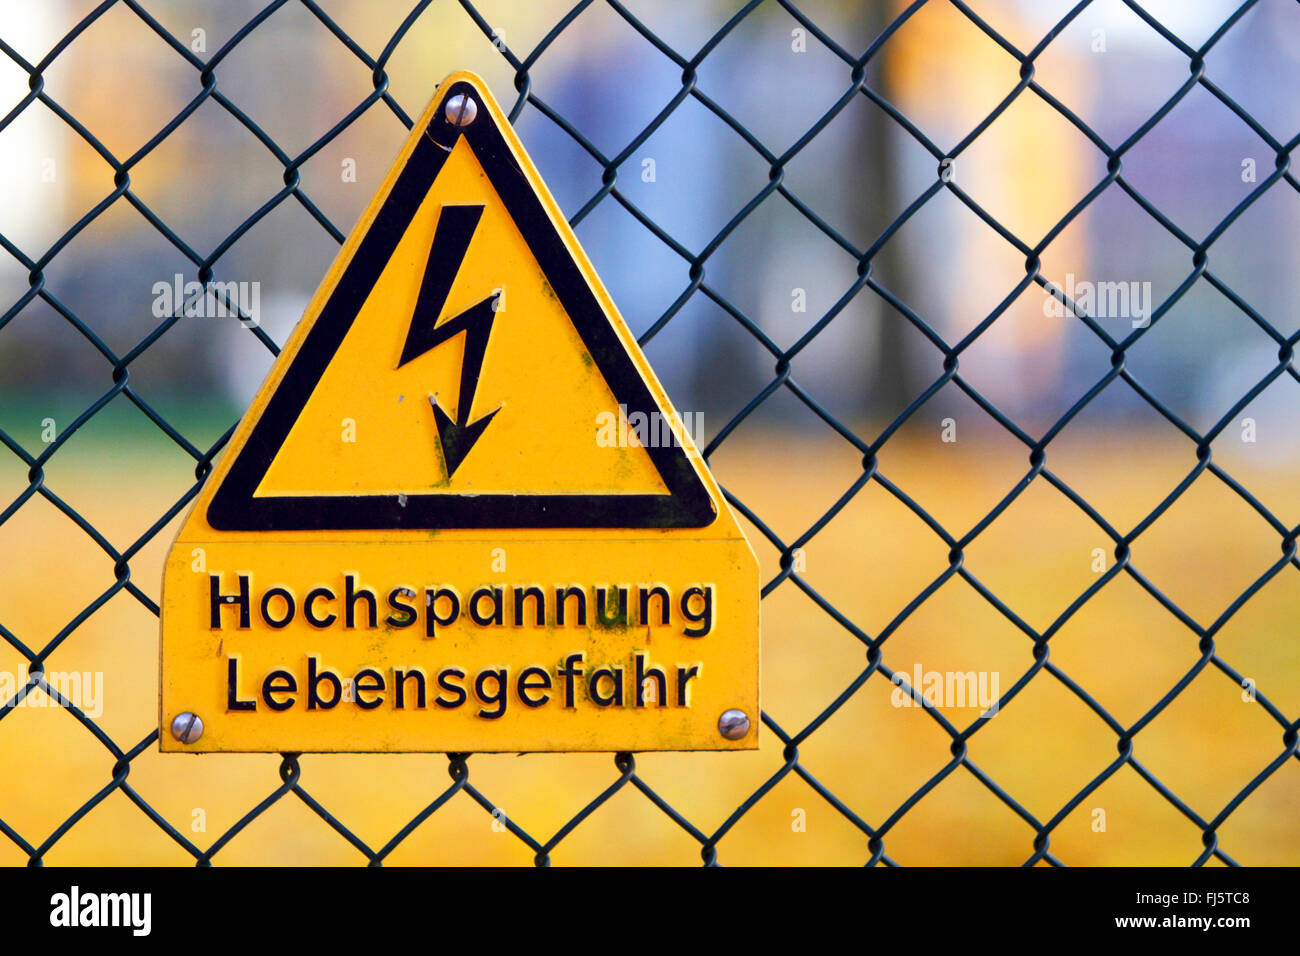 High voltage warning sign at a wire-mesh fence, Germany Stock Photo